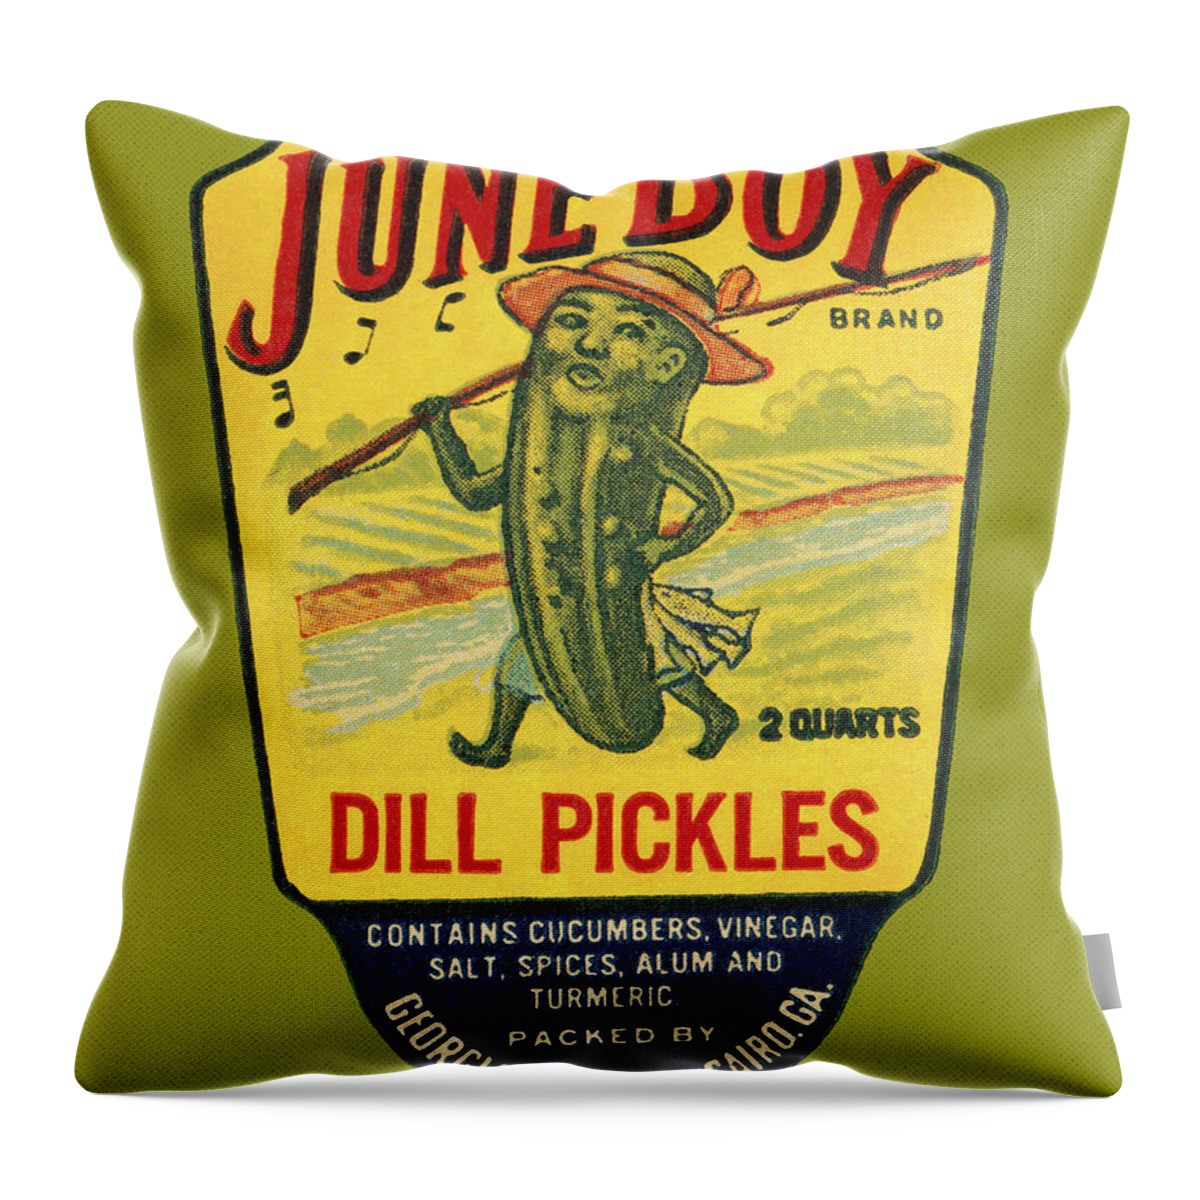 Vintage Throw Pillow featuring the drawing June Boy Dill Pickles #1 by Vintage Food Labels